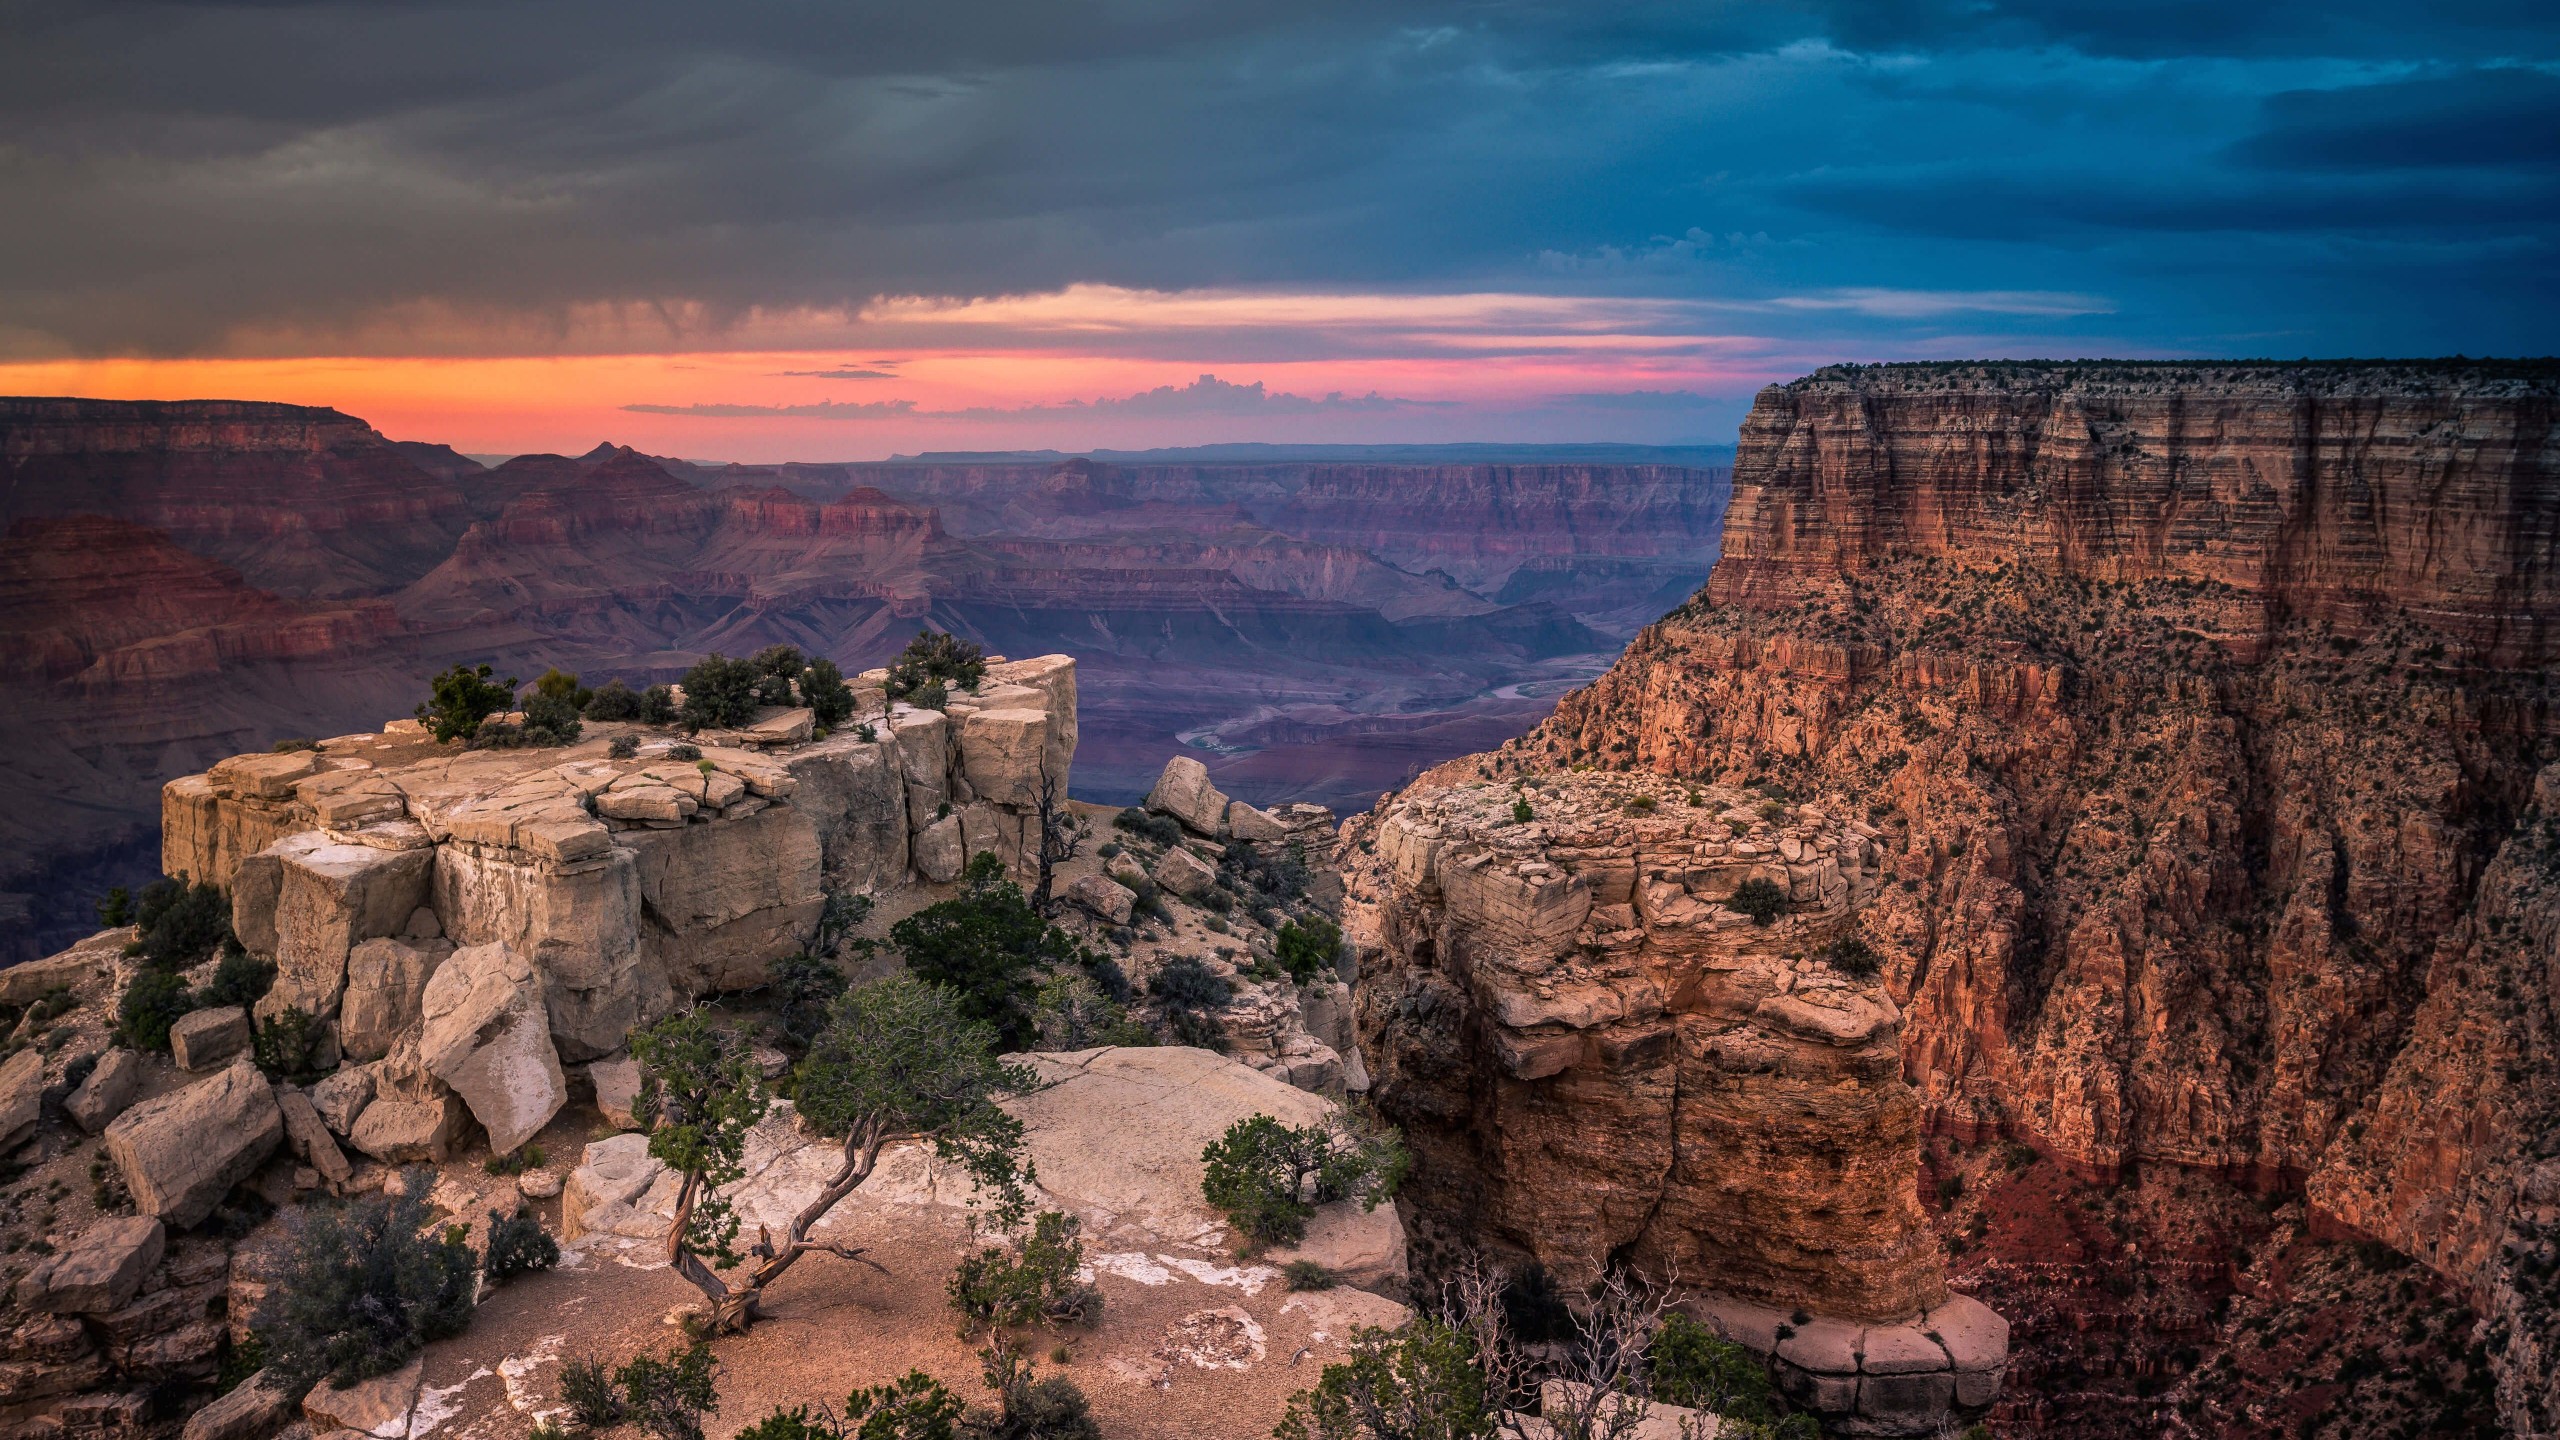 Sunset At The Grand Canyon Wallpaper for Social Media YouTube Channel Art